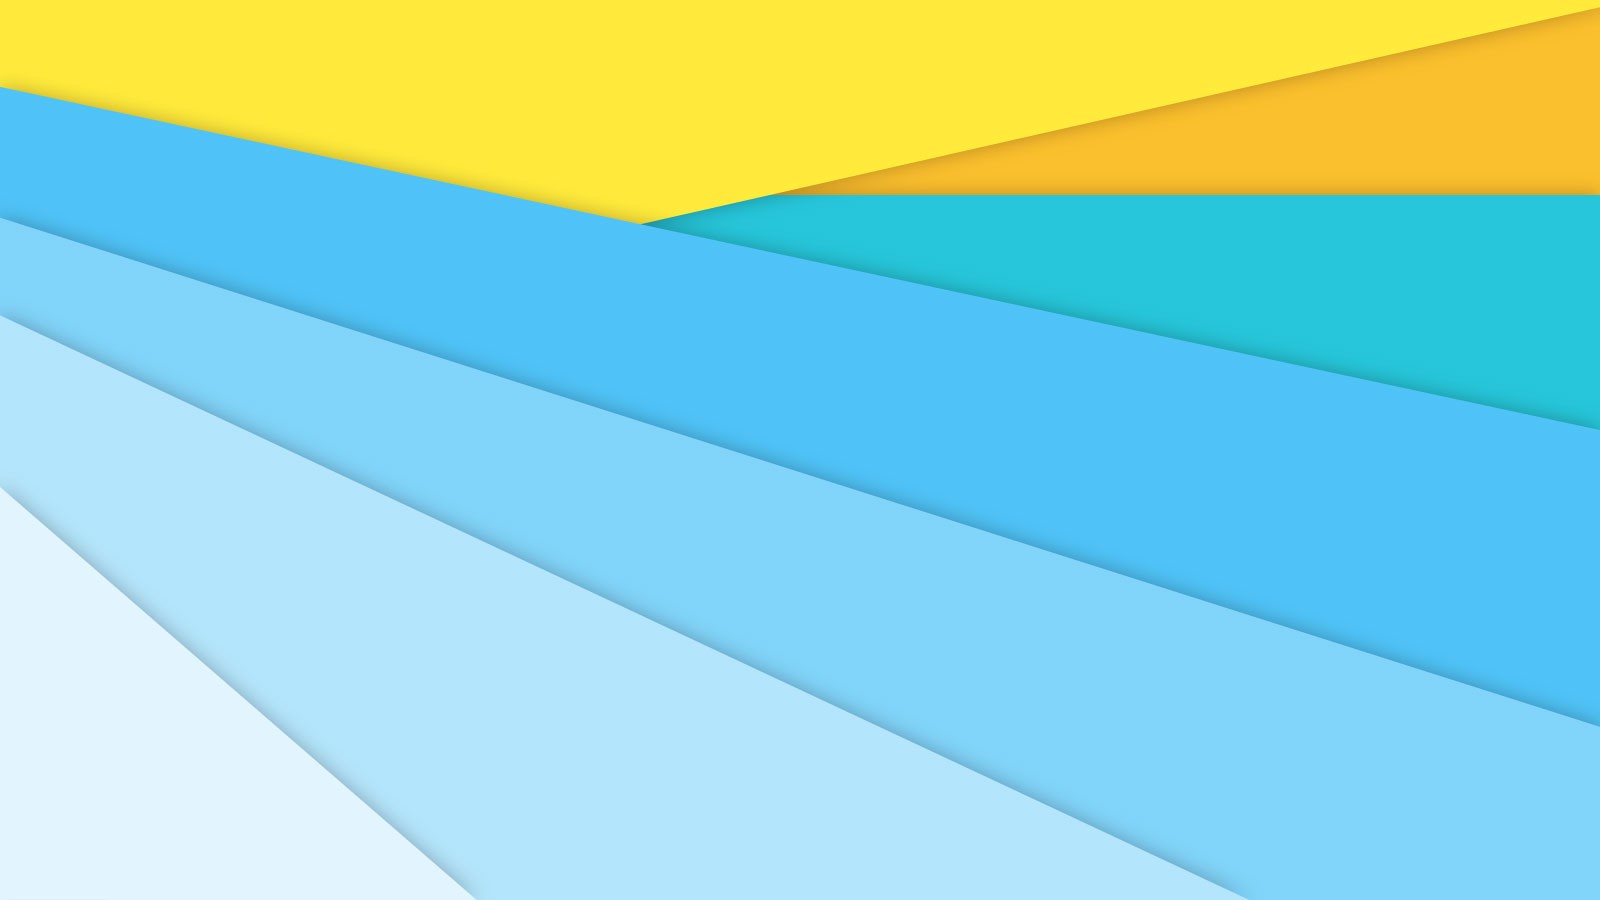 General 1600x900 material style abstract colorful cyan yellow digital art